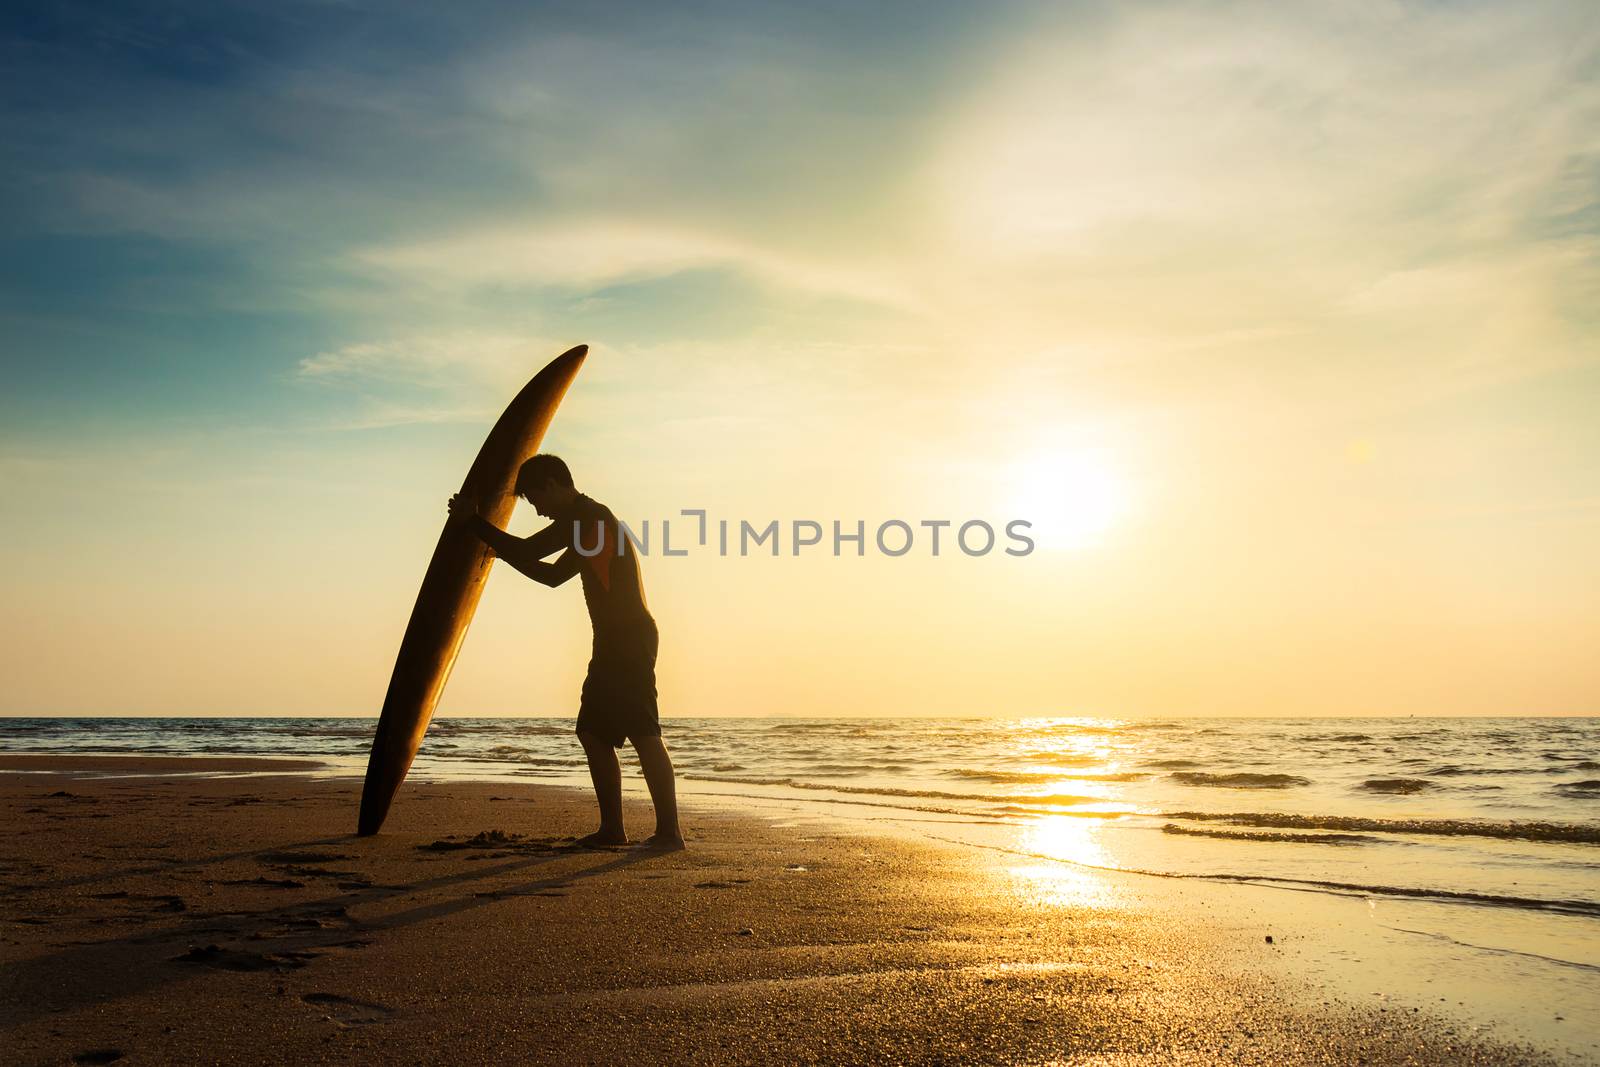 Surfing for water sport outdoor activity lifestyle concept. Silhouette of young happy surf man at white beach with surfboard. Surfer on the beach in sea shore at sunset time with beautiful light.